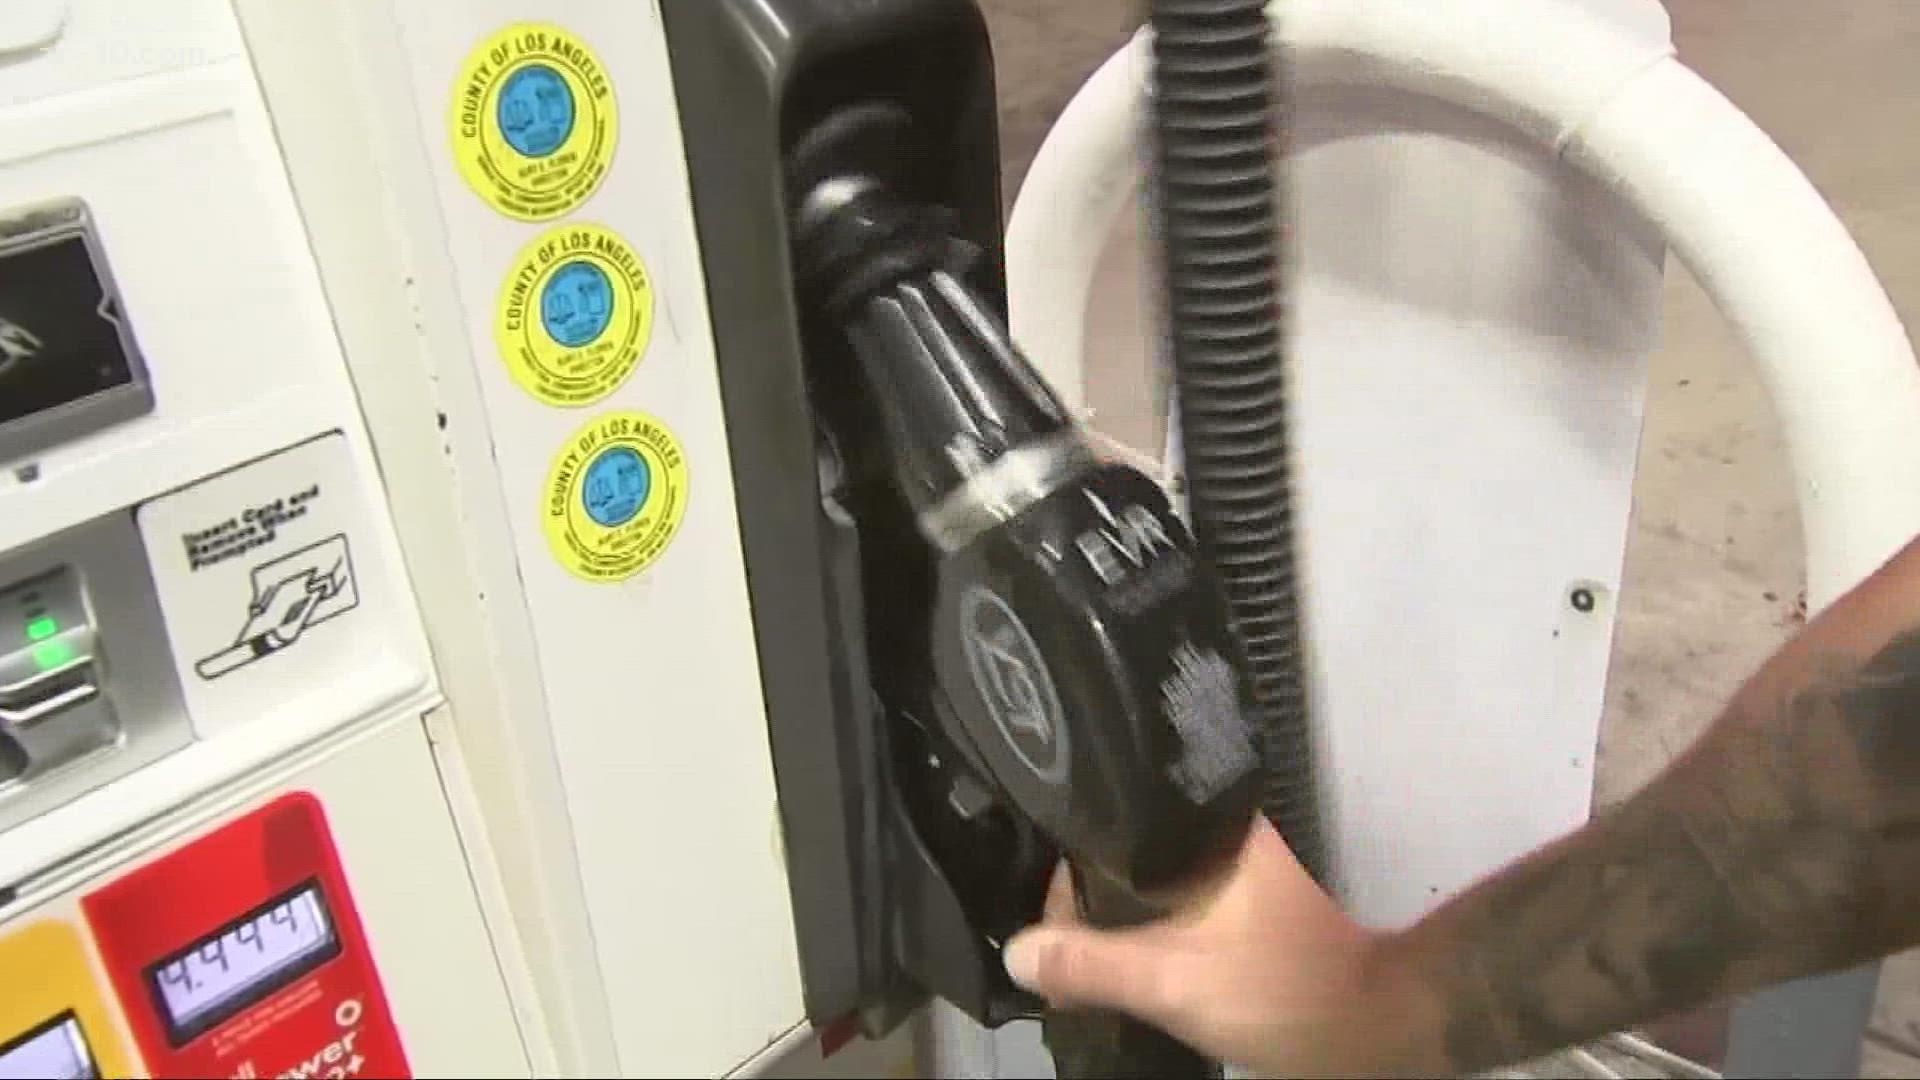 Triple-a says Californians pay $1.20 more per gallon compared to the national average.